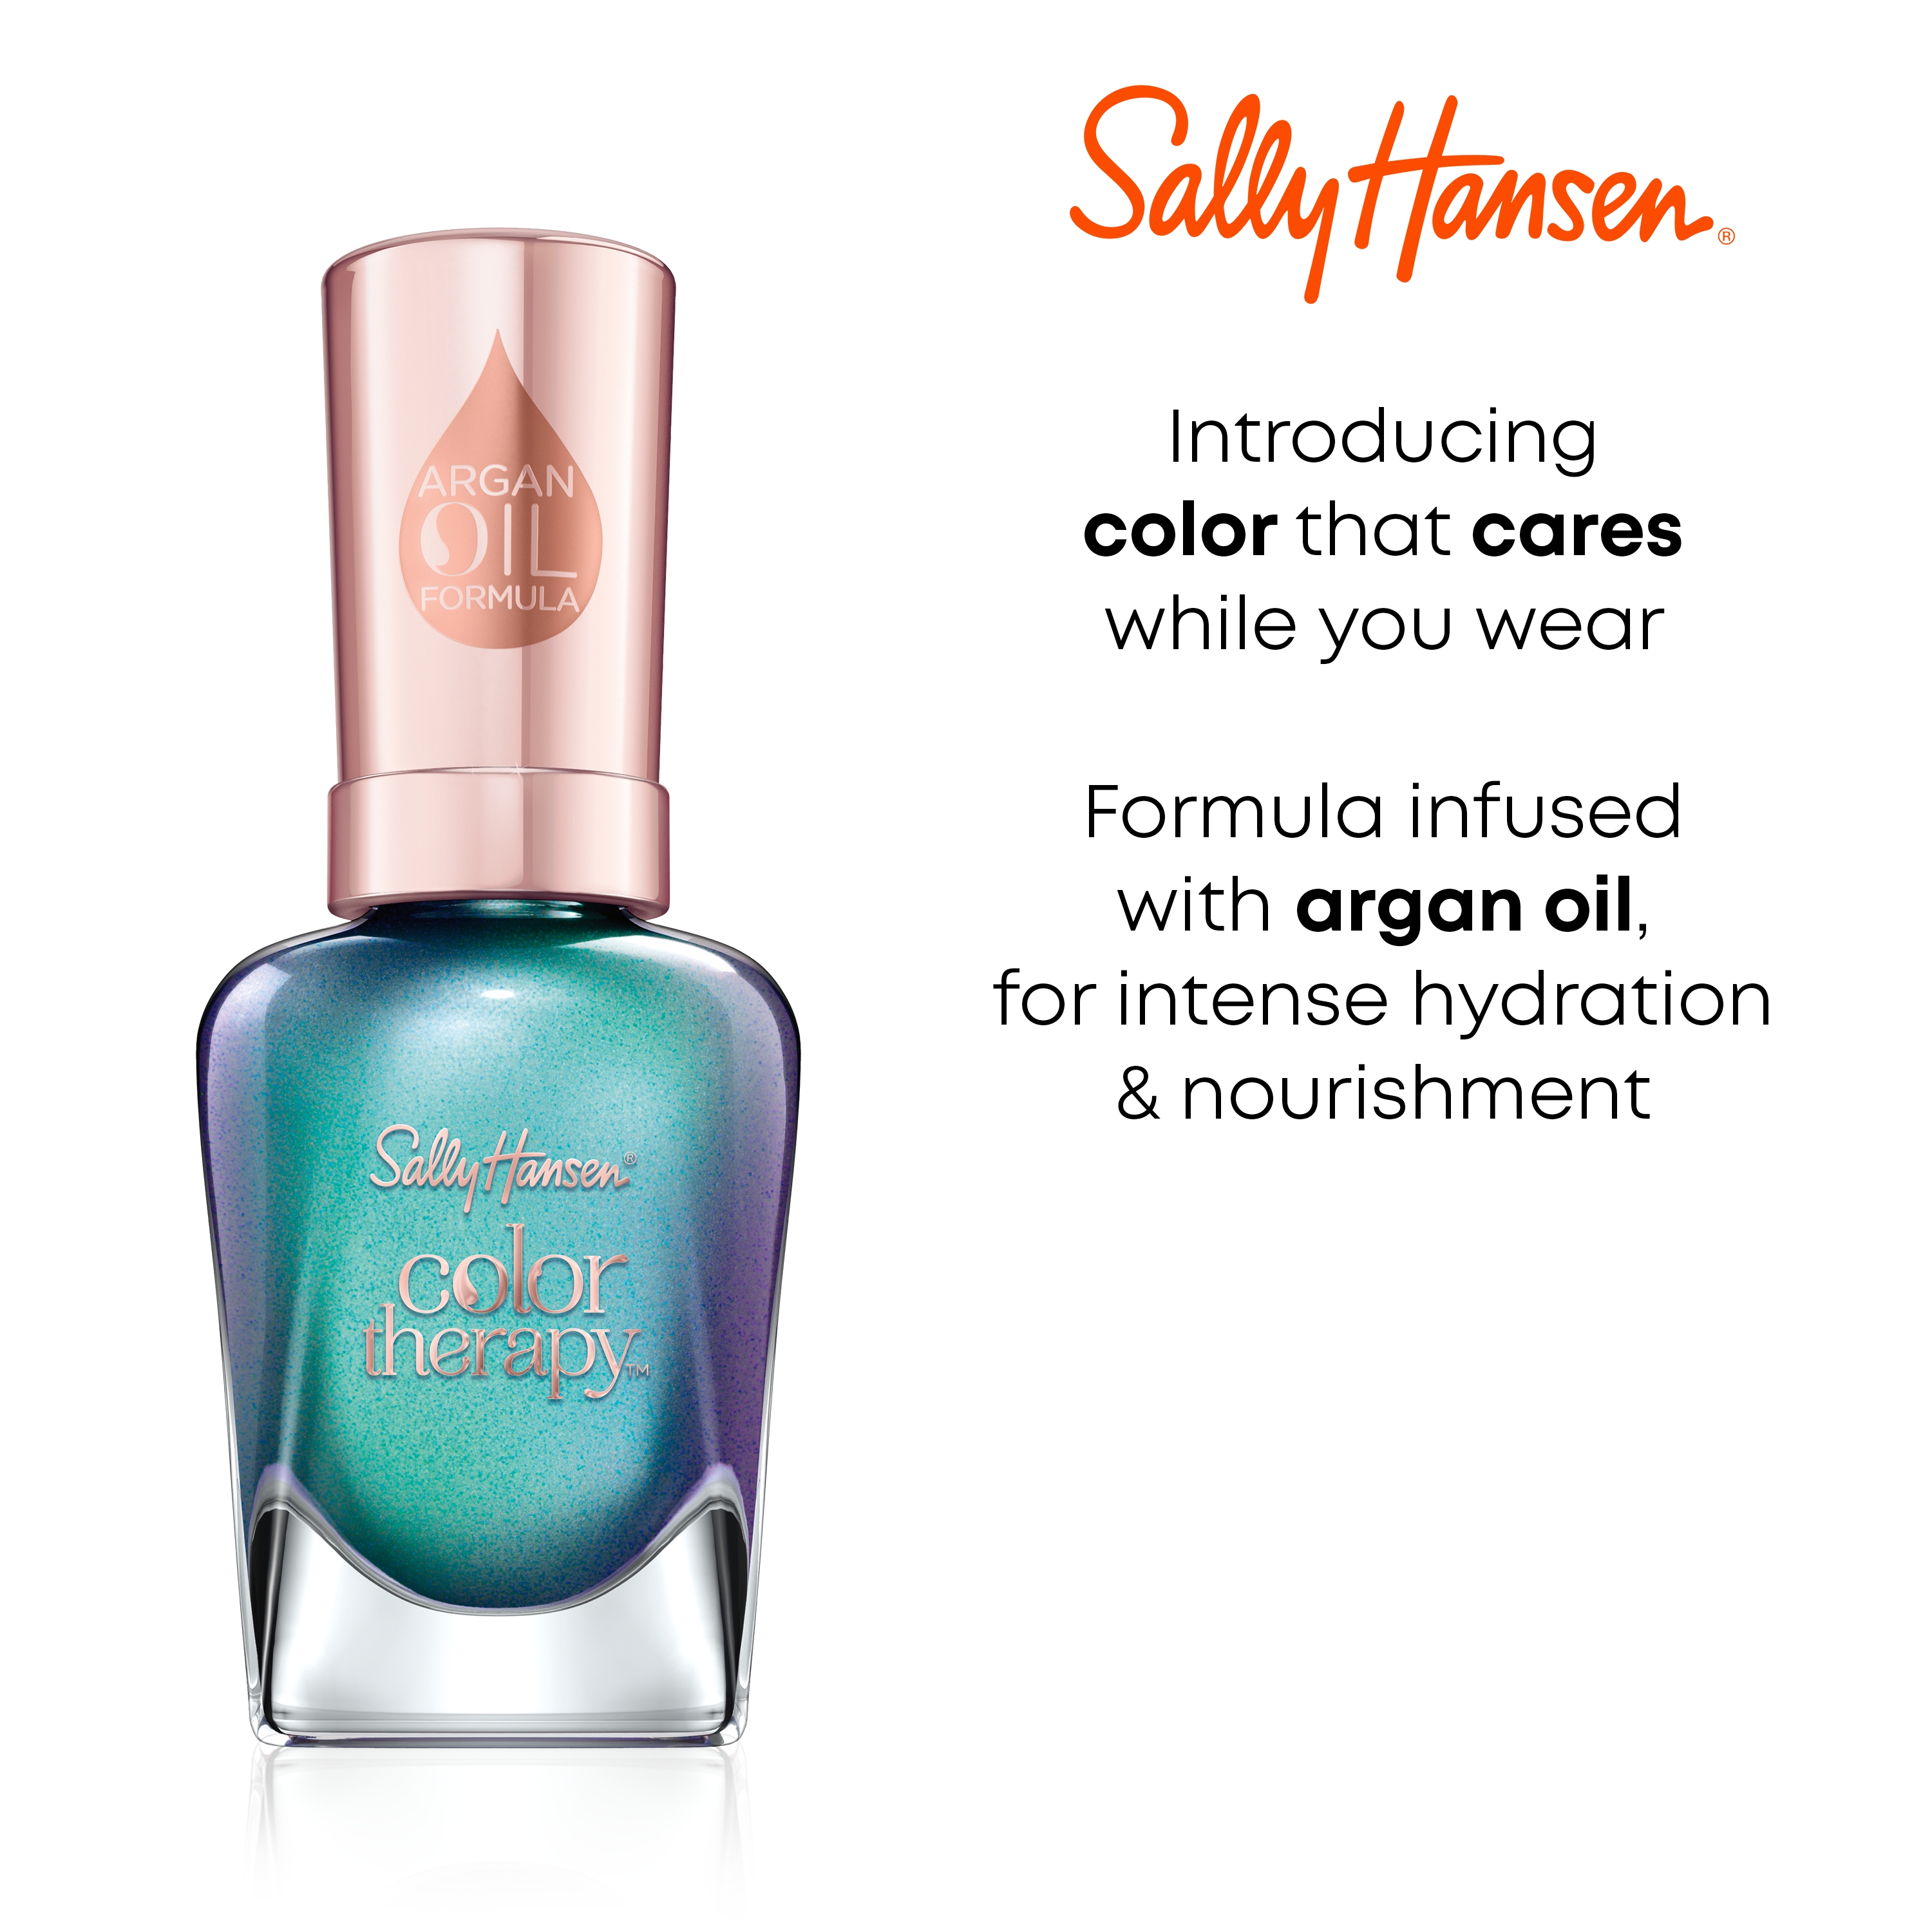 Sally Hansen Color Therapy Nail Color, In My Element, 0.5 oz, Color Nail Polish, Nail Polish, Nail Polish Colors, Restorative, Argan Oil Formula, Instantly Moisturizes - image 2 of 13